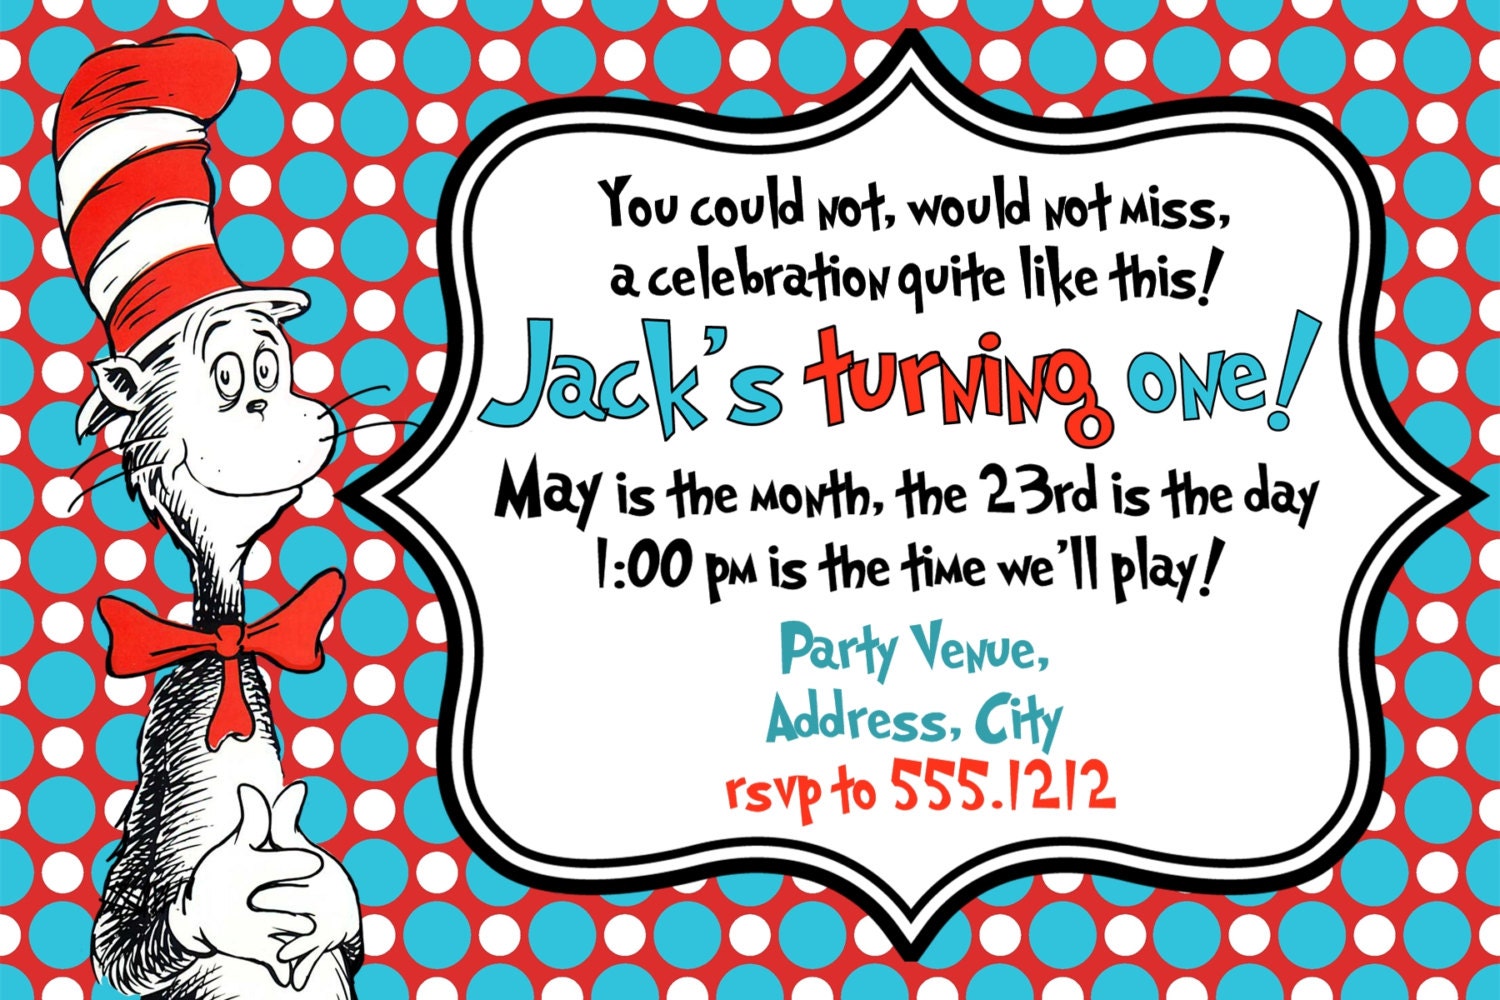 Cat in the Hat Birthday Party Invitation: Printable 4x6 or 5x7